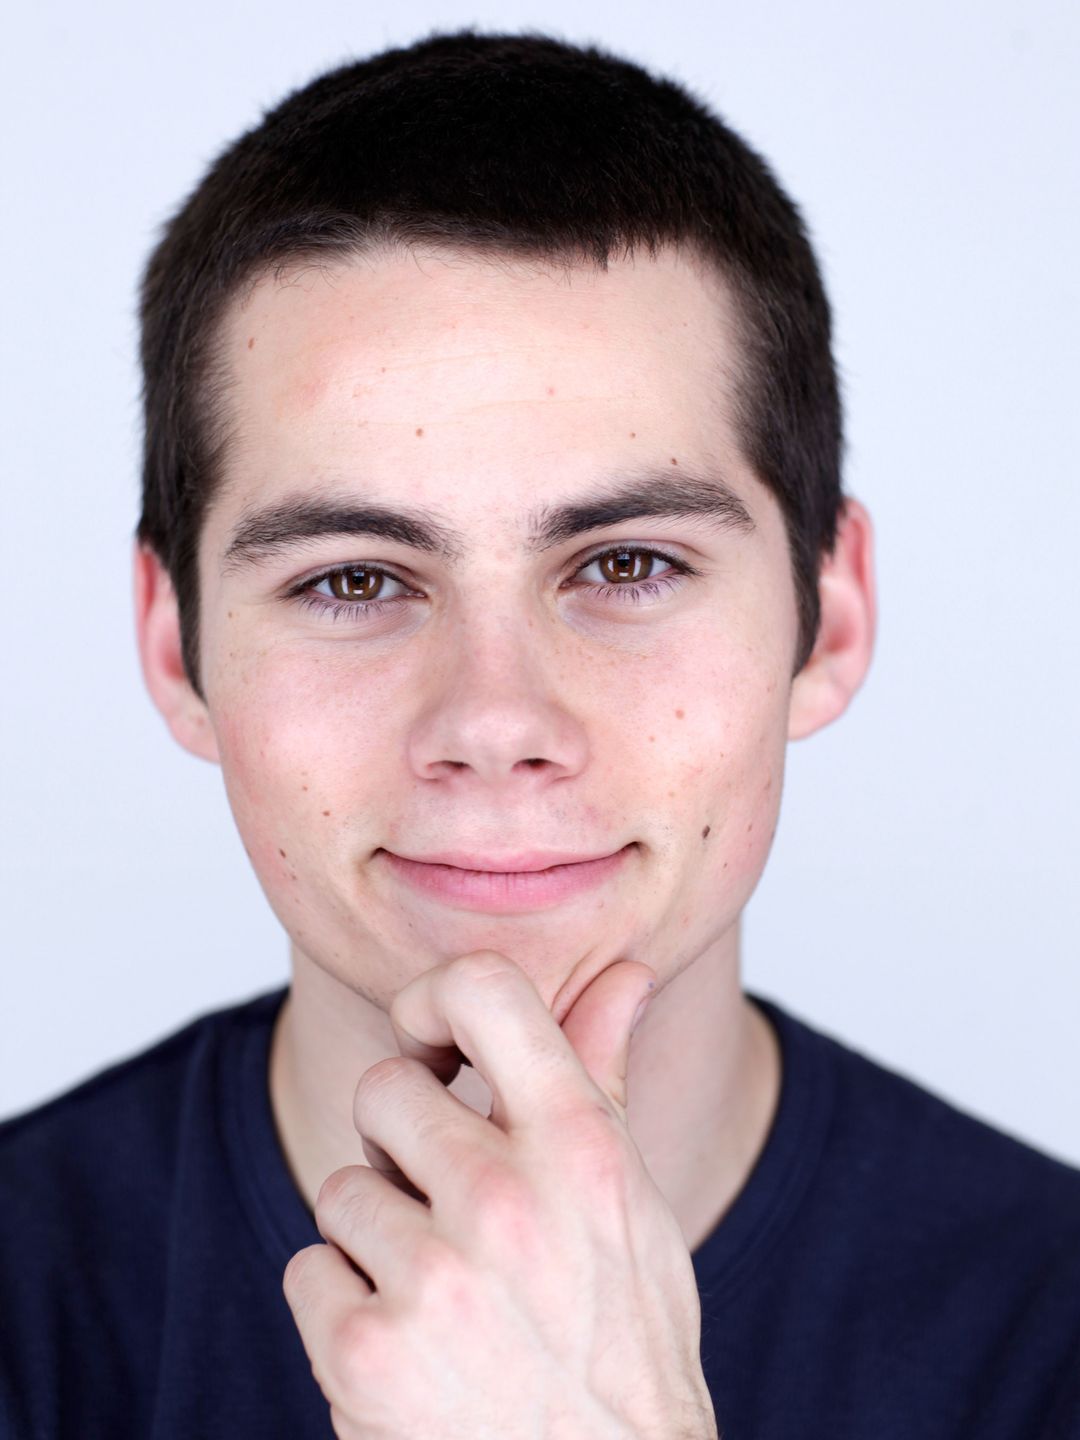 Dylan O`Brien current look